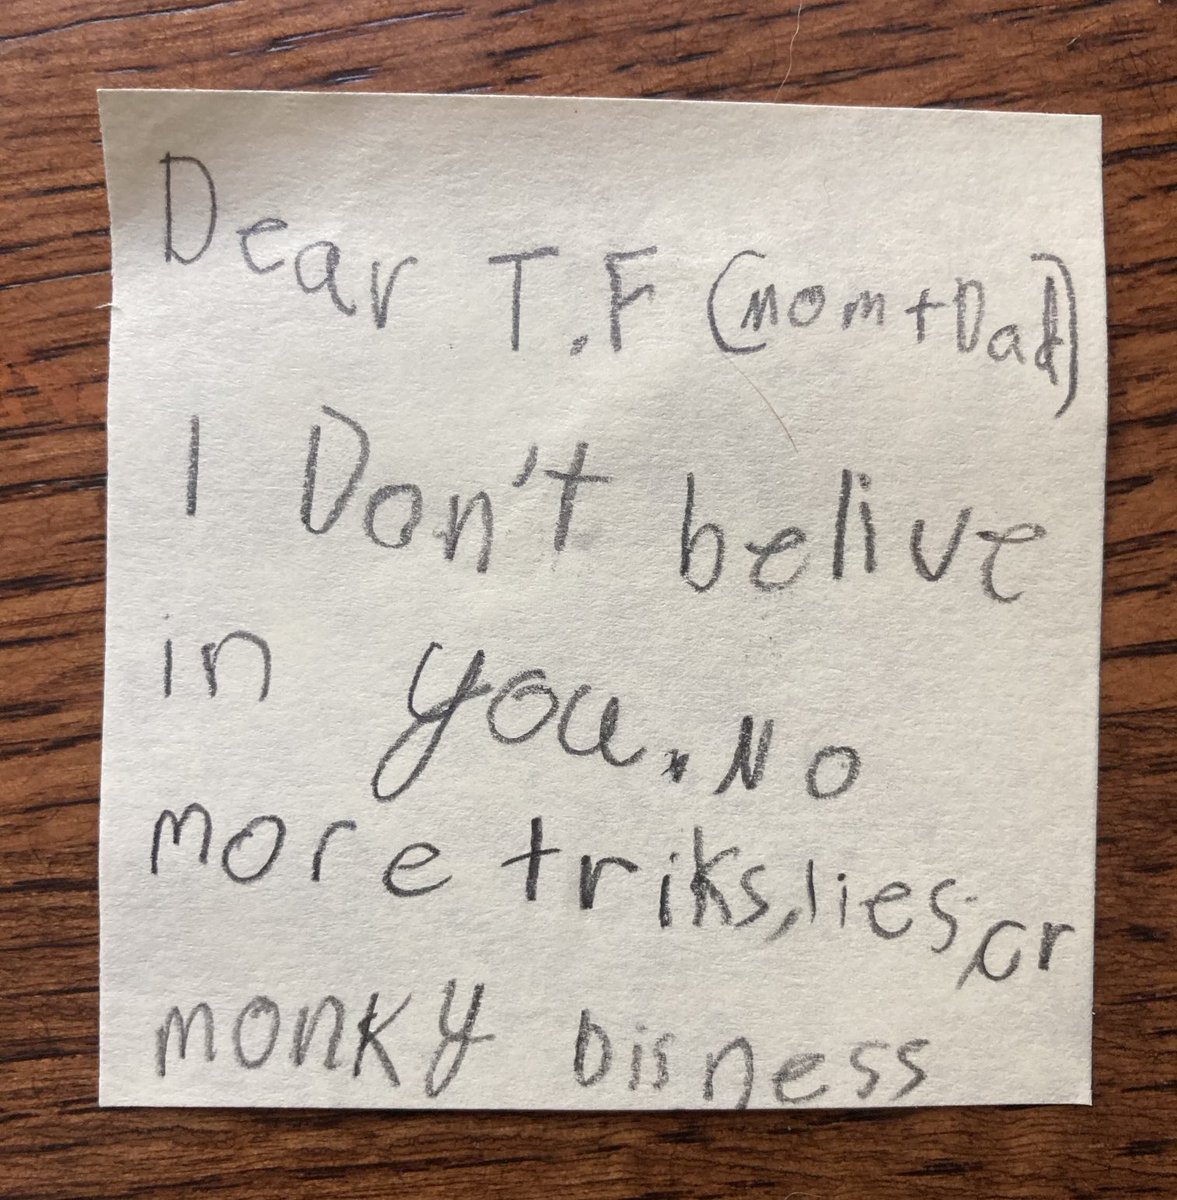 Personal news: After years of flawless service, the Tooth Fairy hit a rough patch this week.